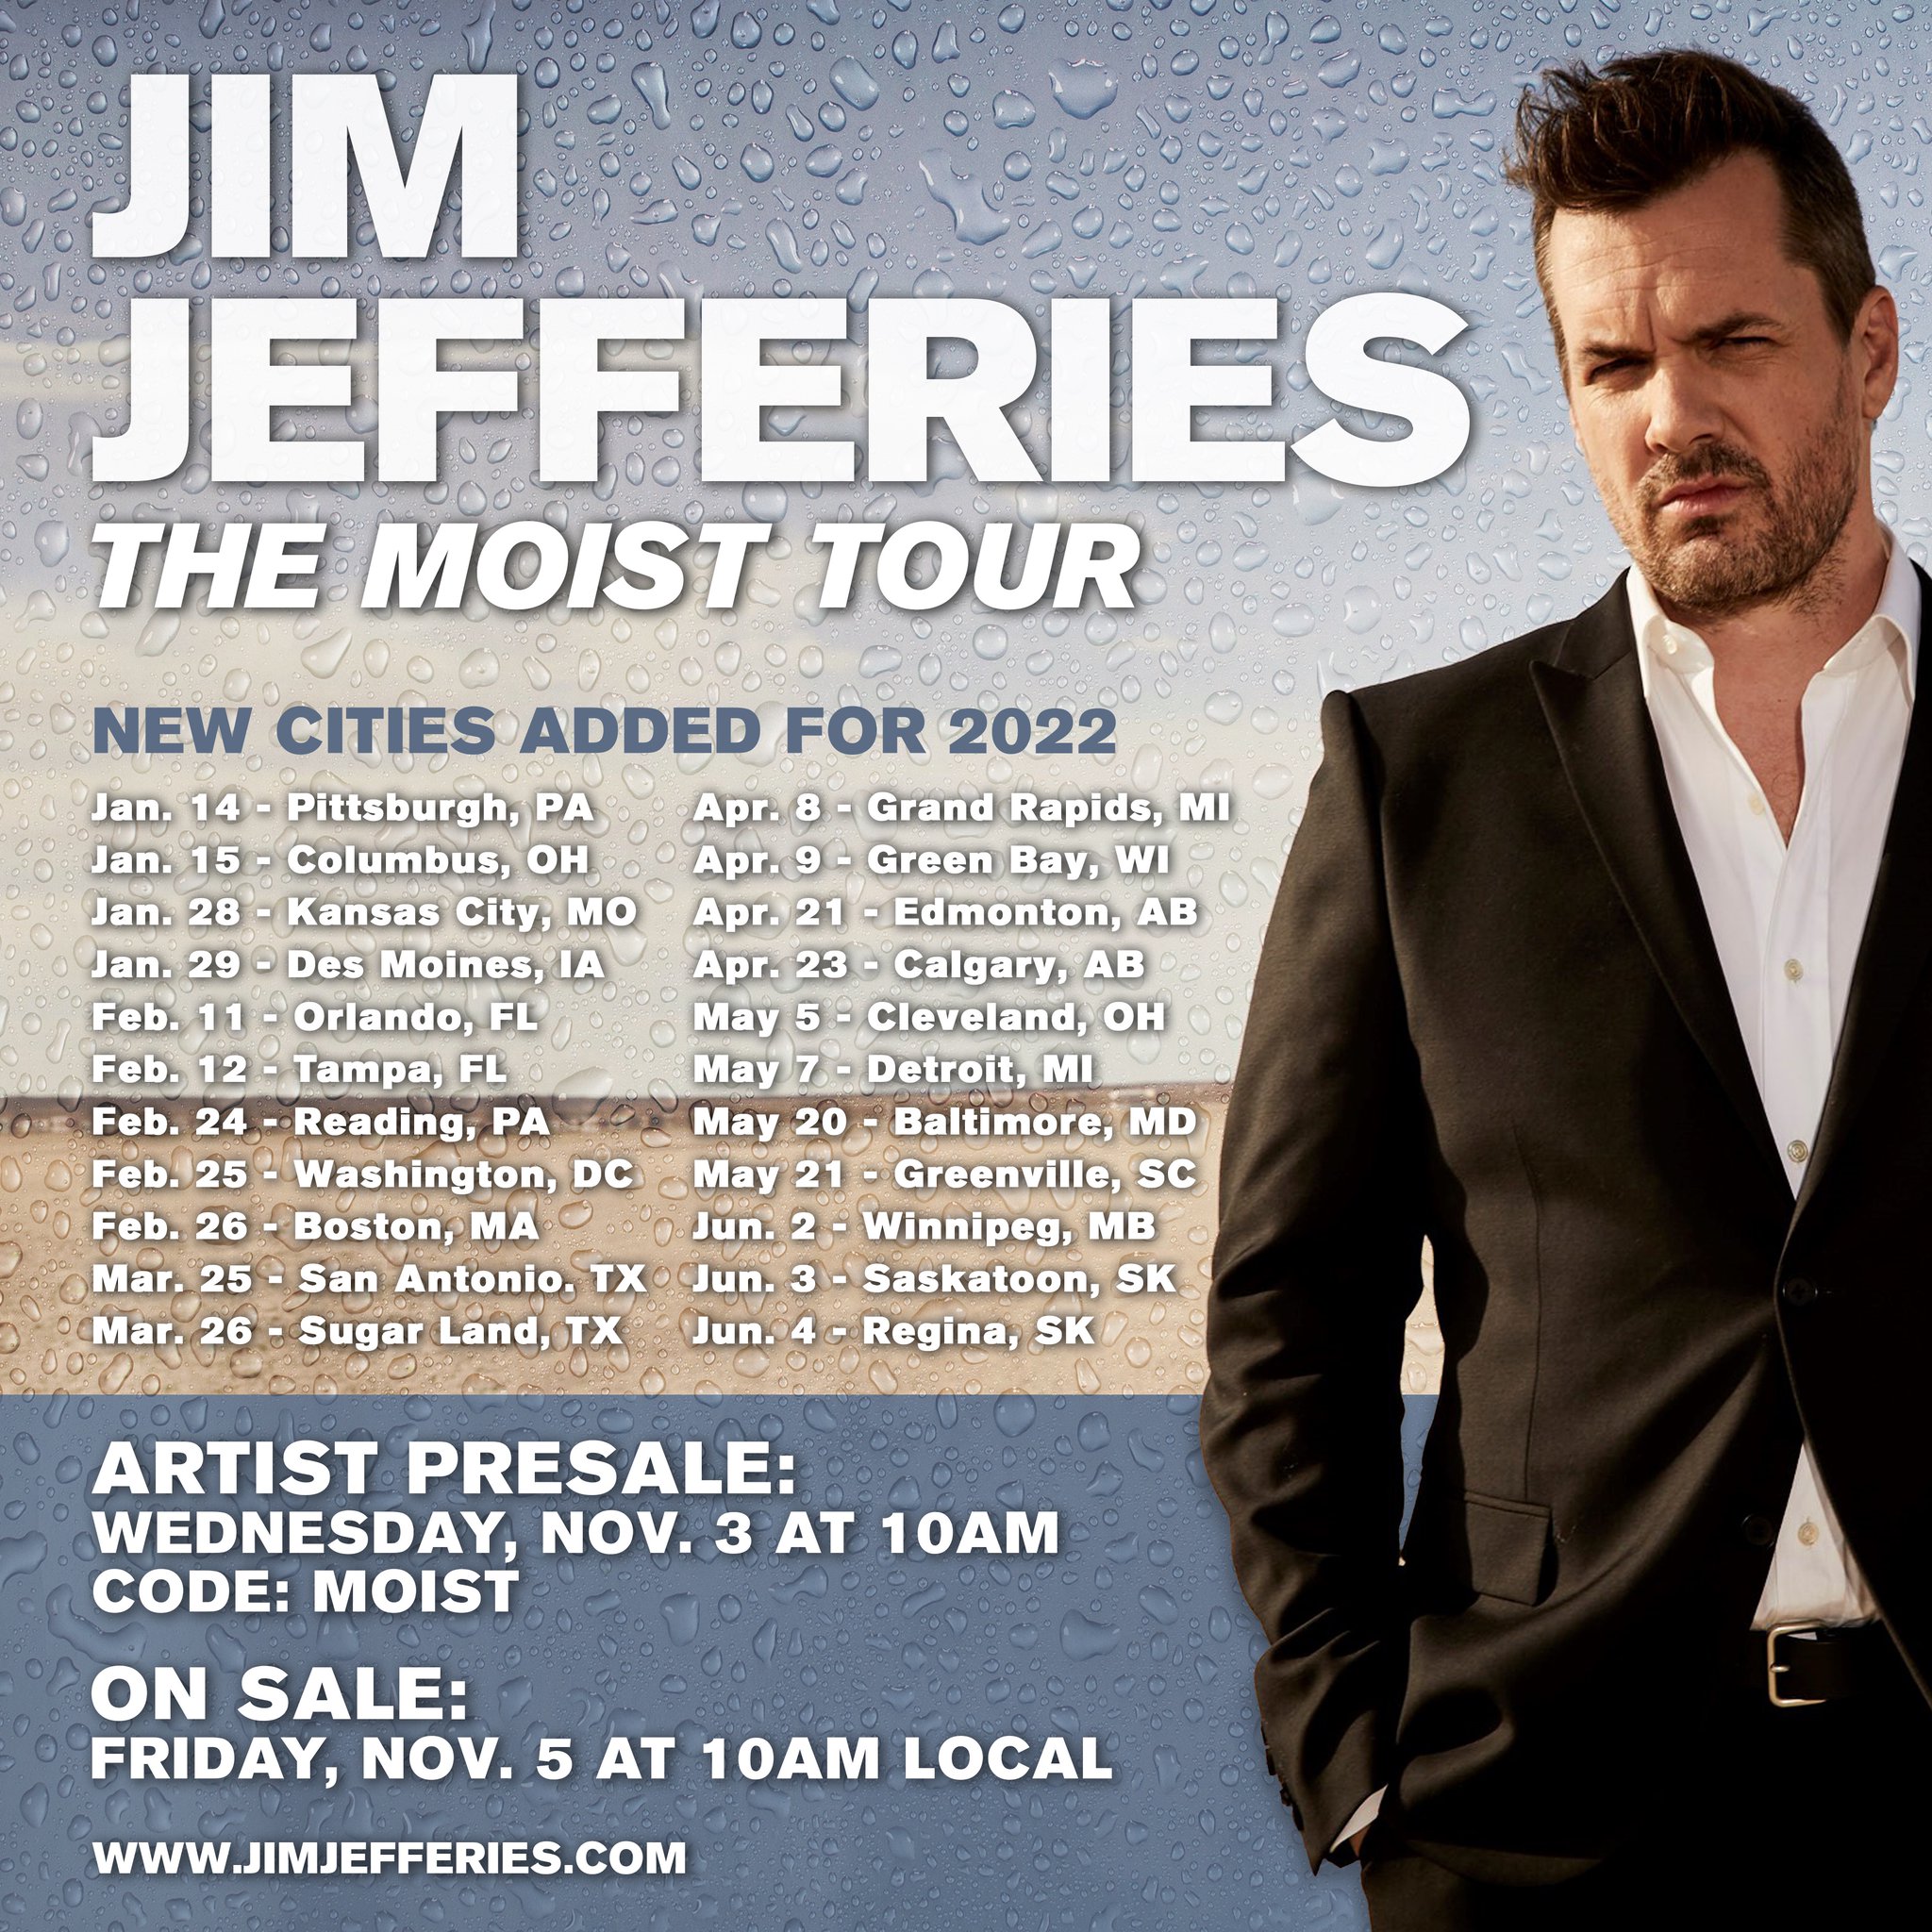 jim jefferies on Twitter "The Moist Tour is rolling into 2022 with so